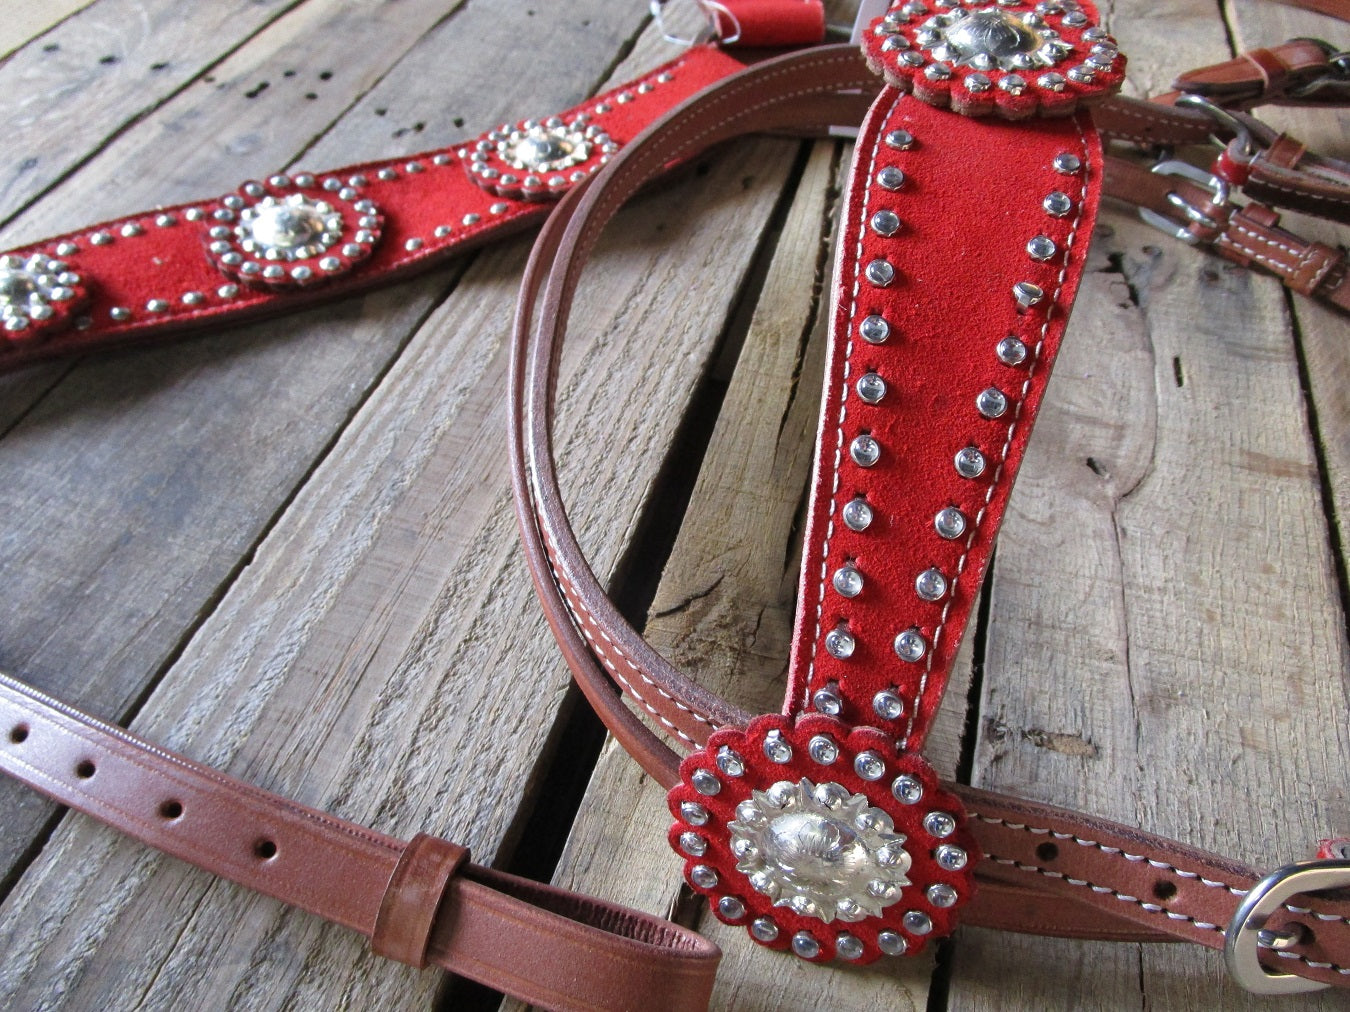 Western Headstall Breast Collar Red Silver Show Horse Leather Bridle